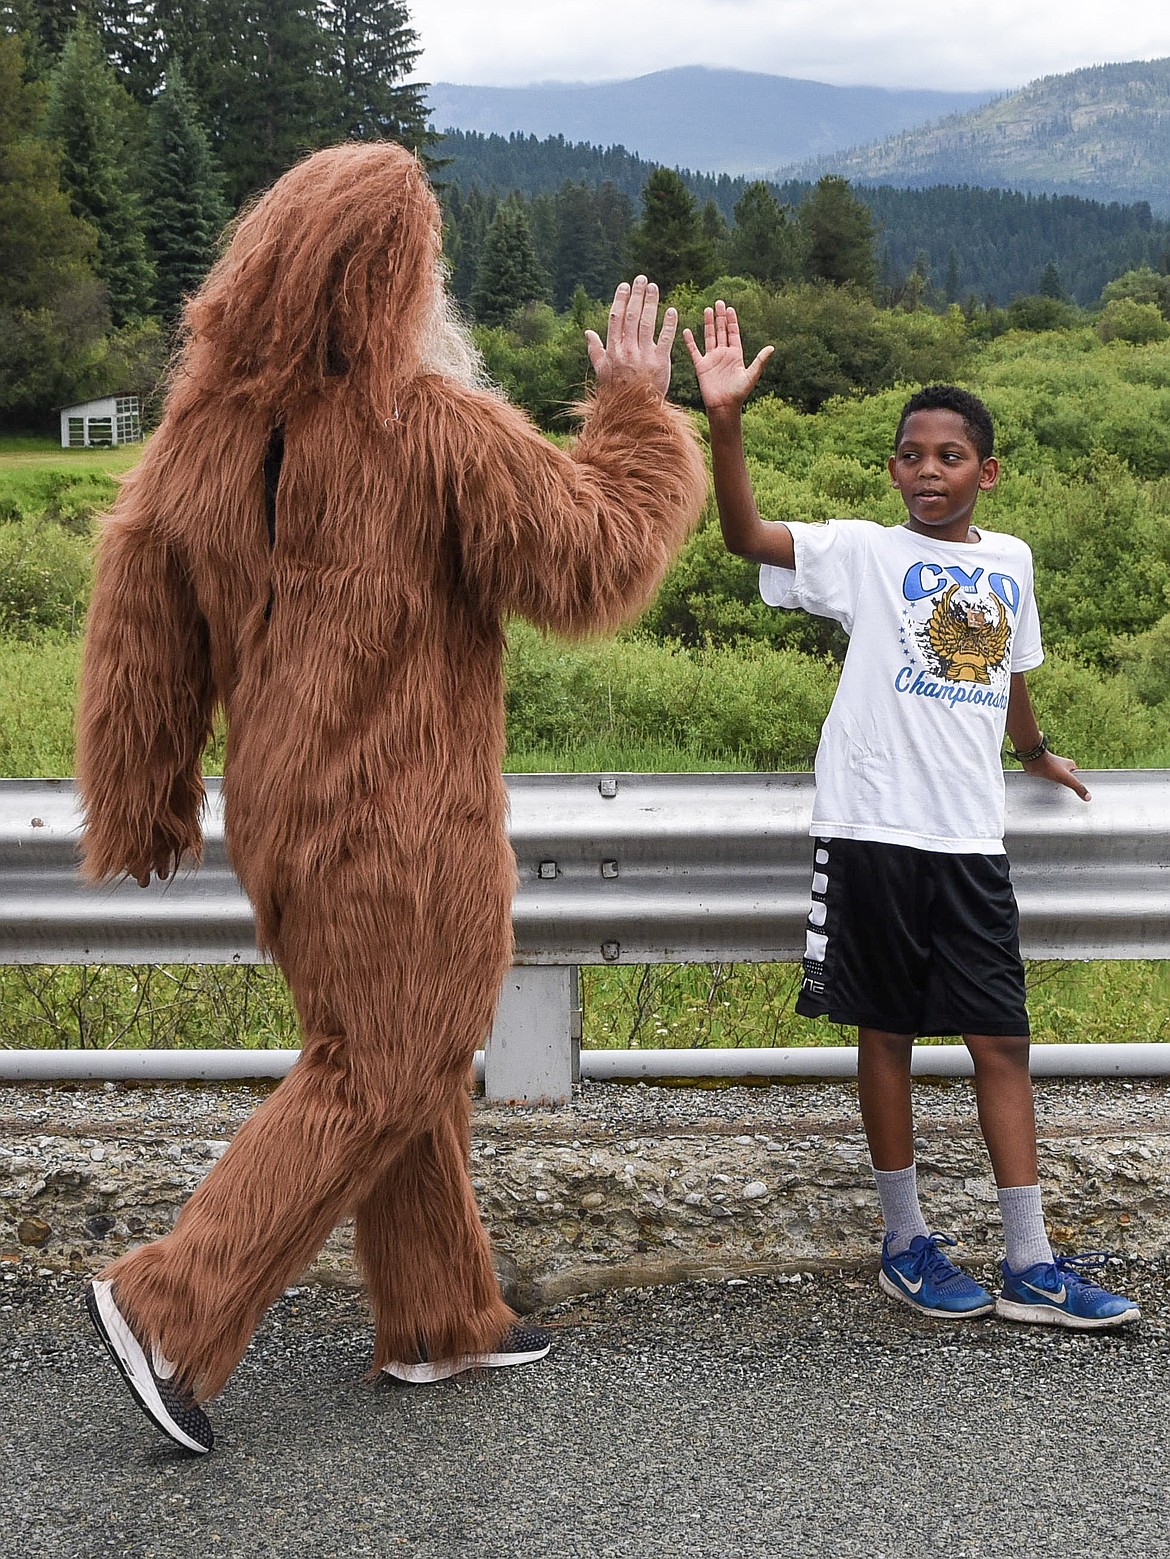 Sasquatch gives a high five to third-place finisher Nassun Schmidt during the 2019 Sasquatch Run at the annual Yaak Sasquatch Festival. (Ben Kibbey/The Western News)